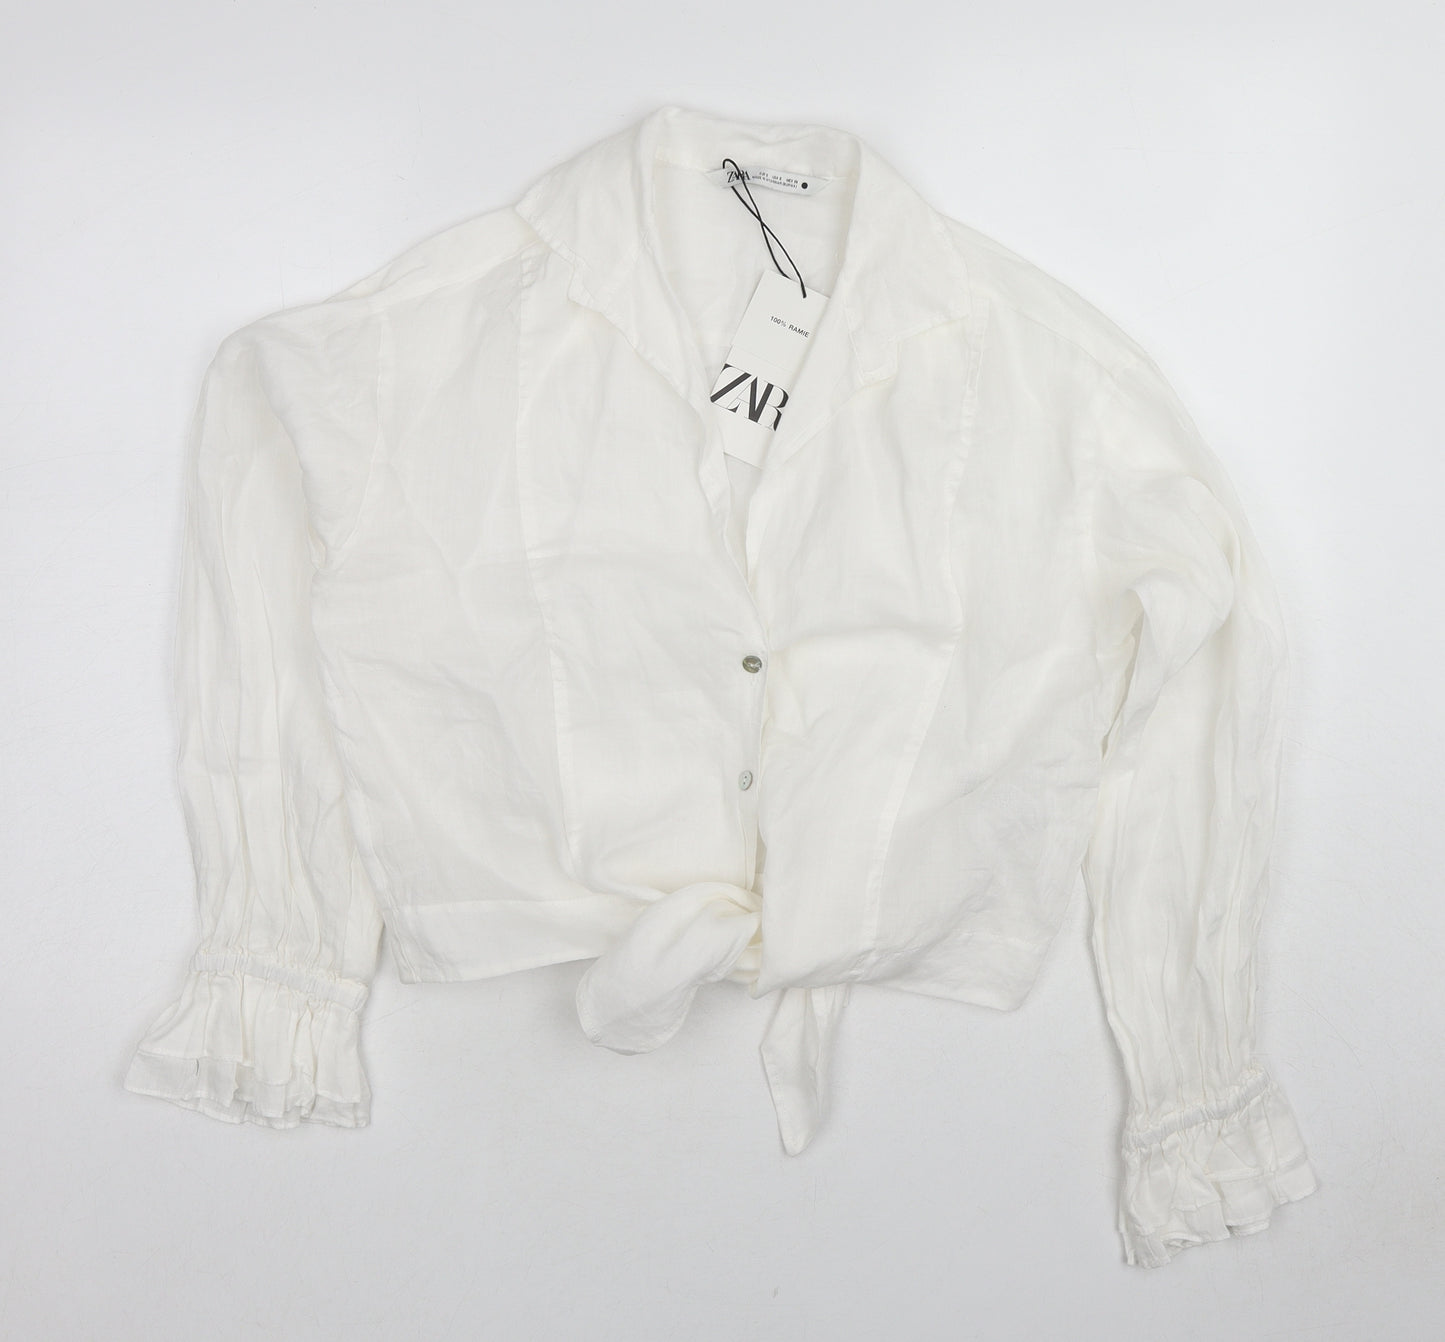 Zara Womens White Ramie Camisole Button-Up Size S Collared - Knot Front